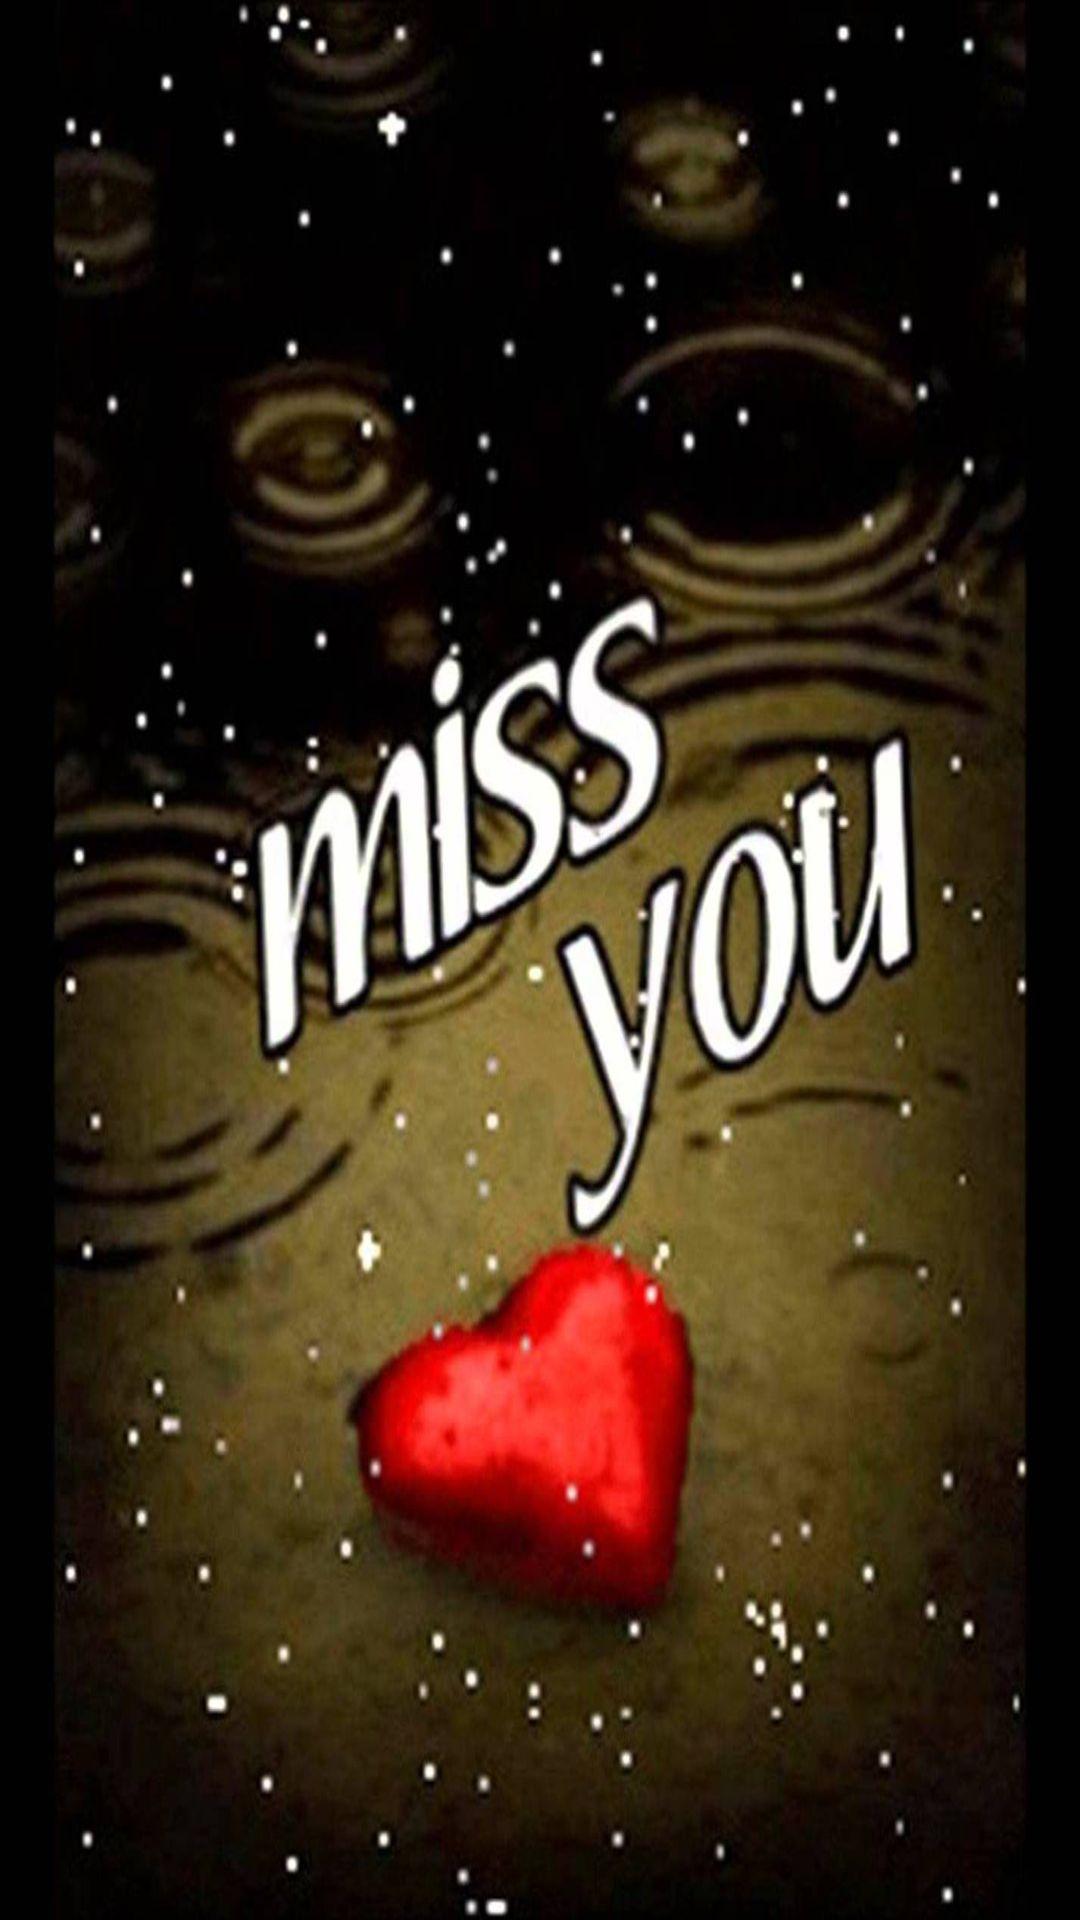 Miss you so much with heart iphone 6 full HD wallpaper. iPhone